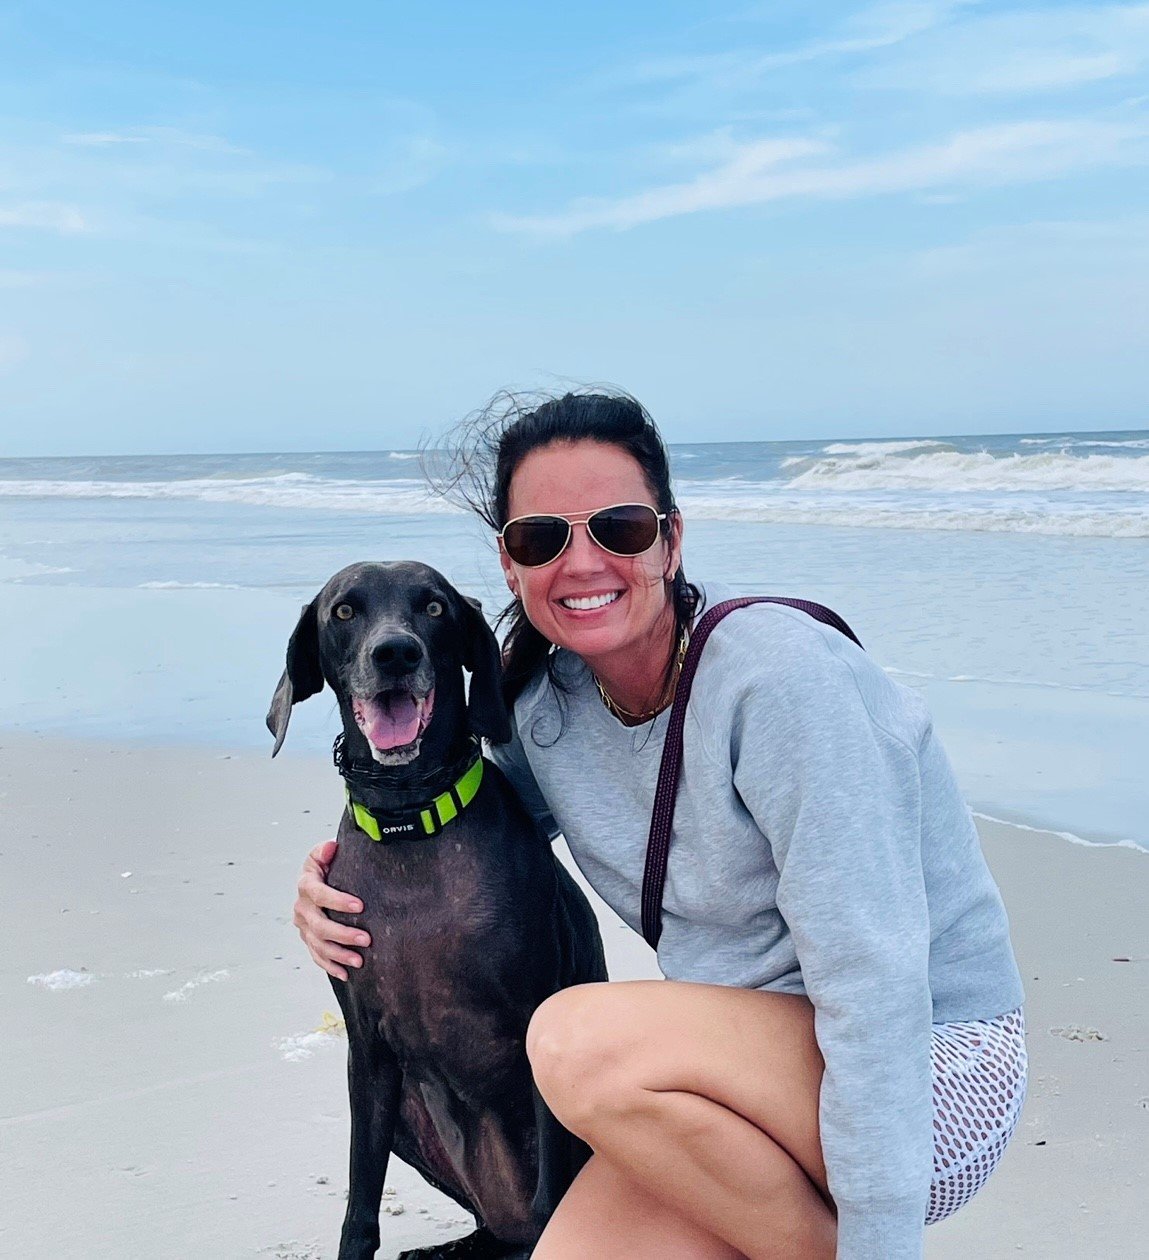 Kate Wagner with her Blue Weimaraner, Bella on the beach. The beach is one of Wagner’s favorite places.